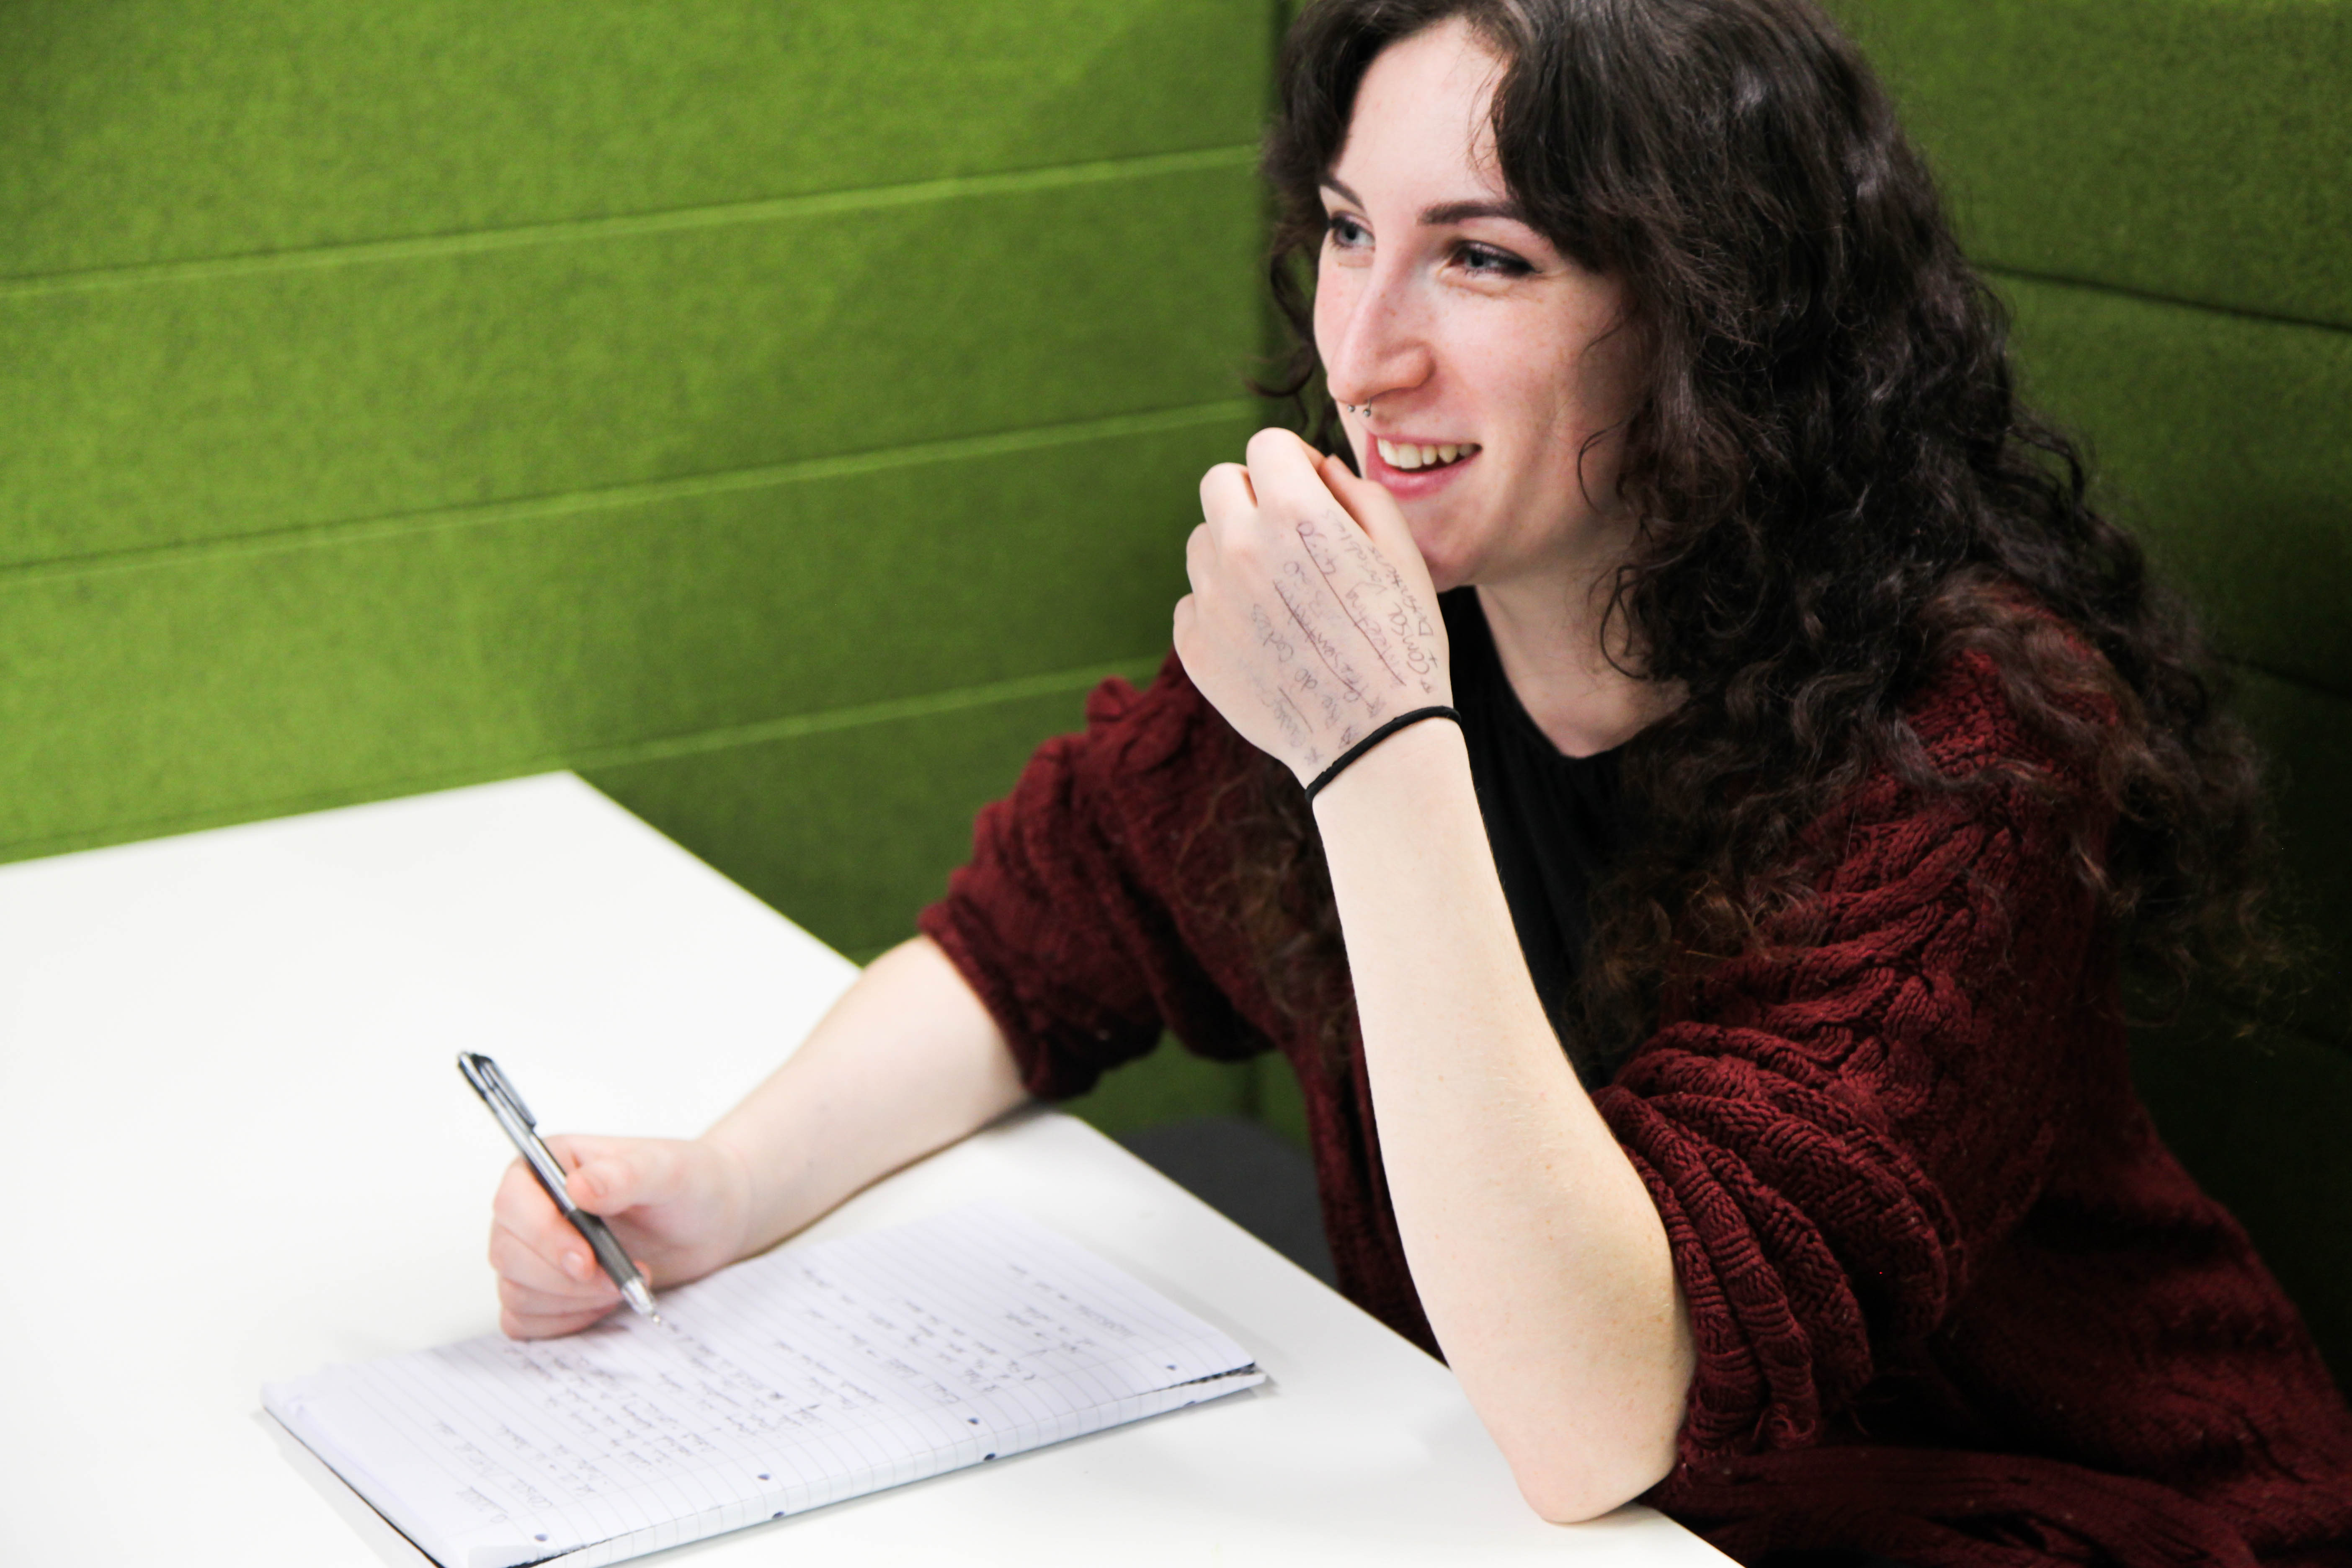 Image - Student smiling whilst writing at table.